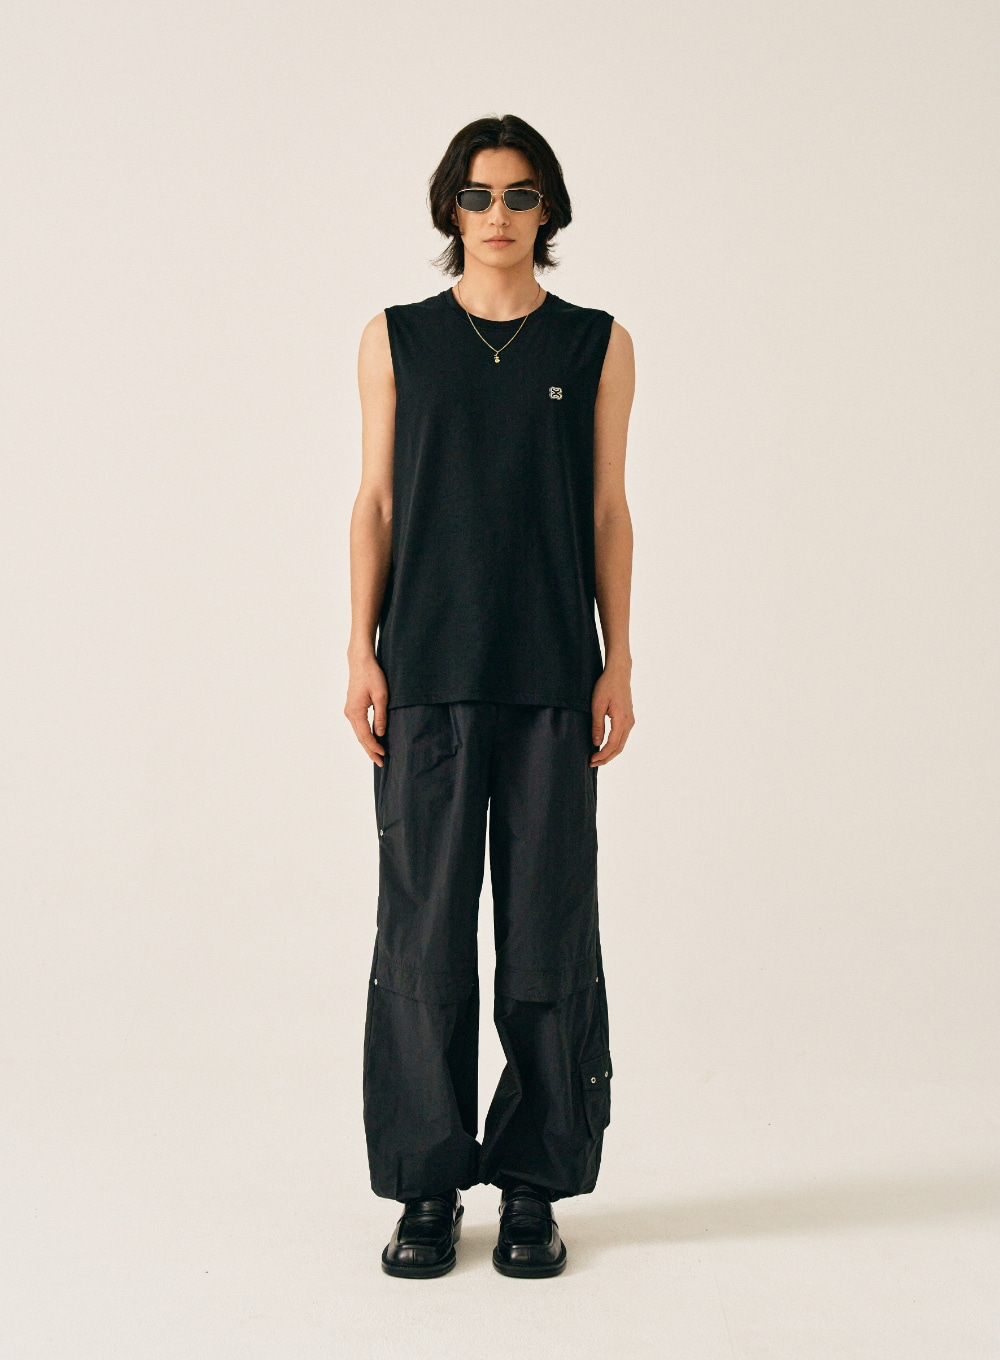 All Day Crew Neck Layered Sleeveless Top - Classic Black